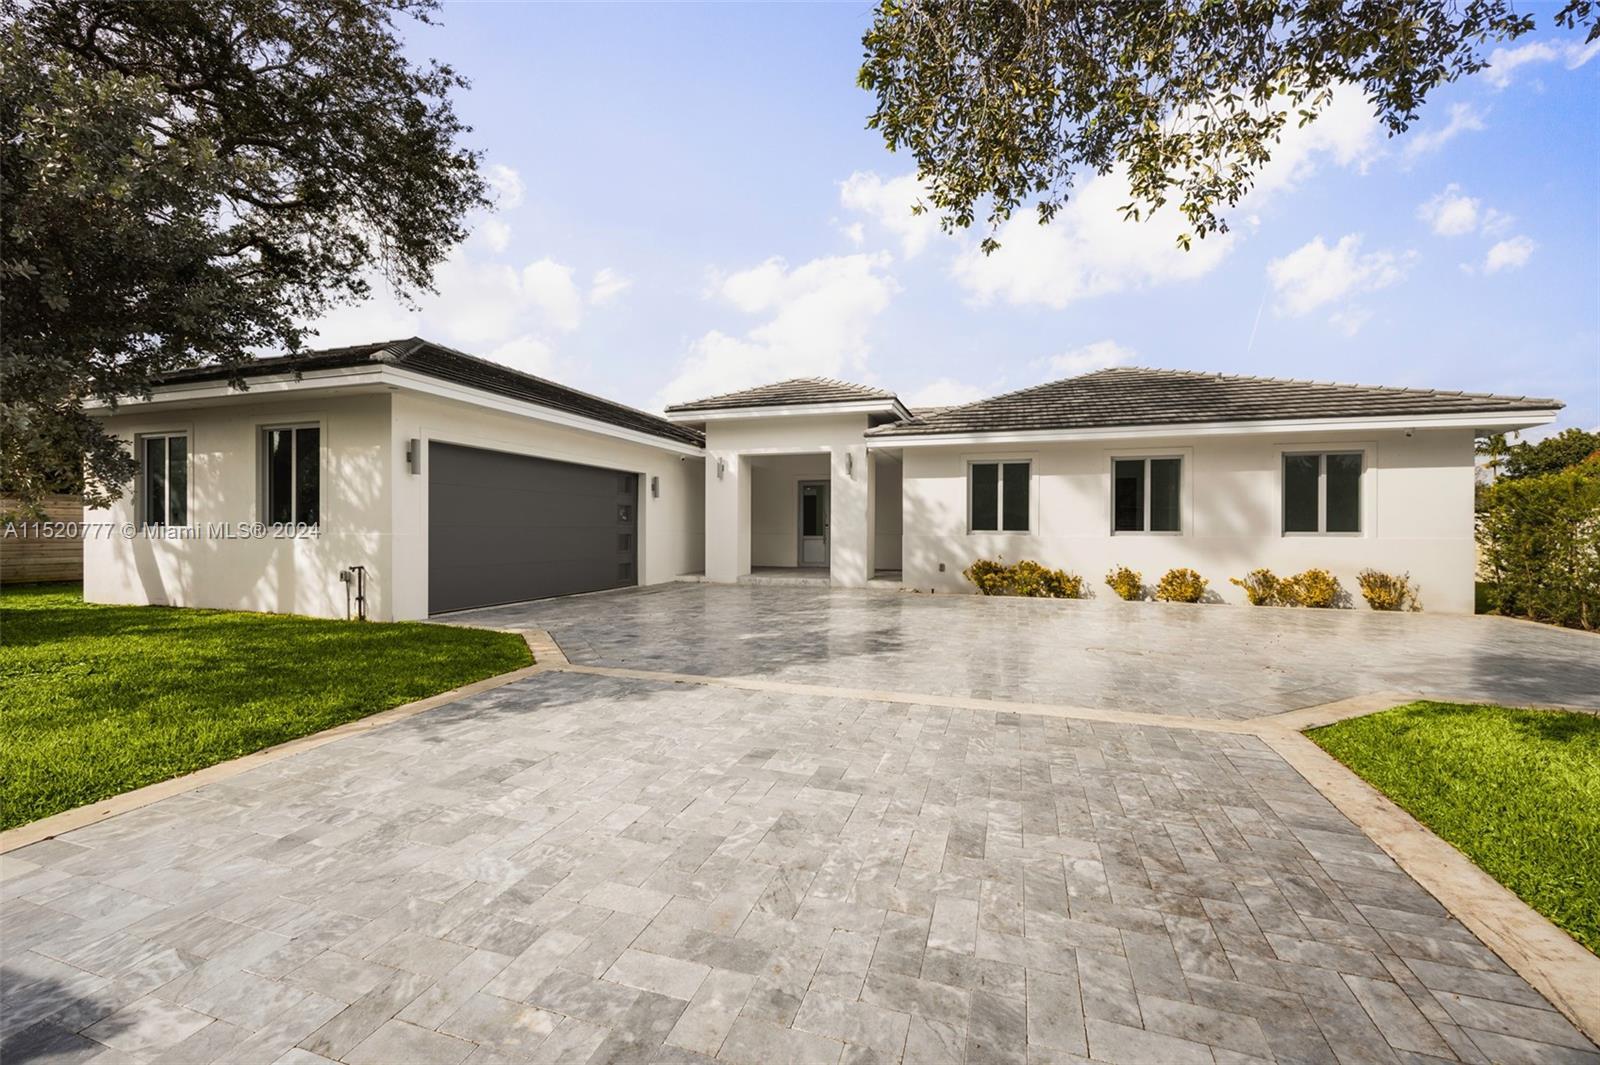 Experience unparalleled luxury in this new custom home, featuring 5 bedrooms, 4 baths, and exquisite